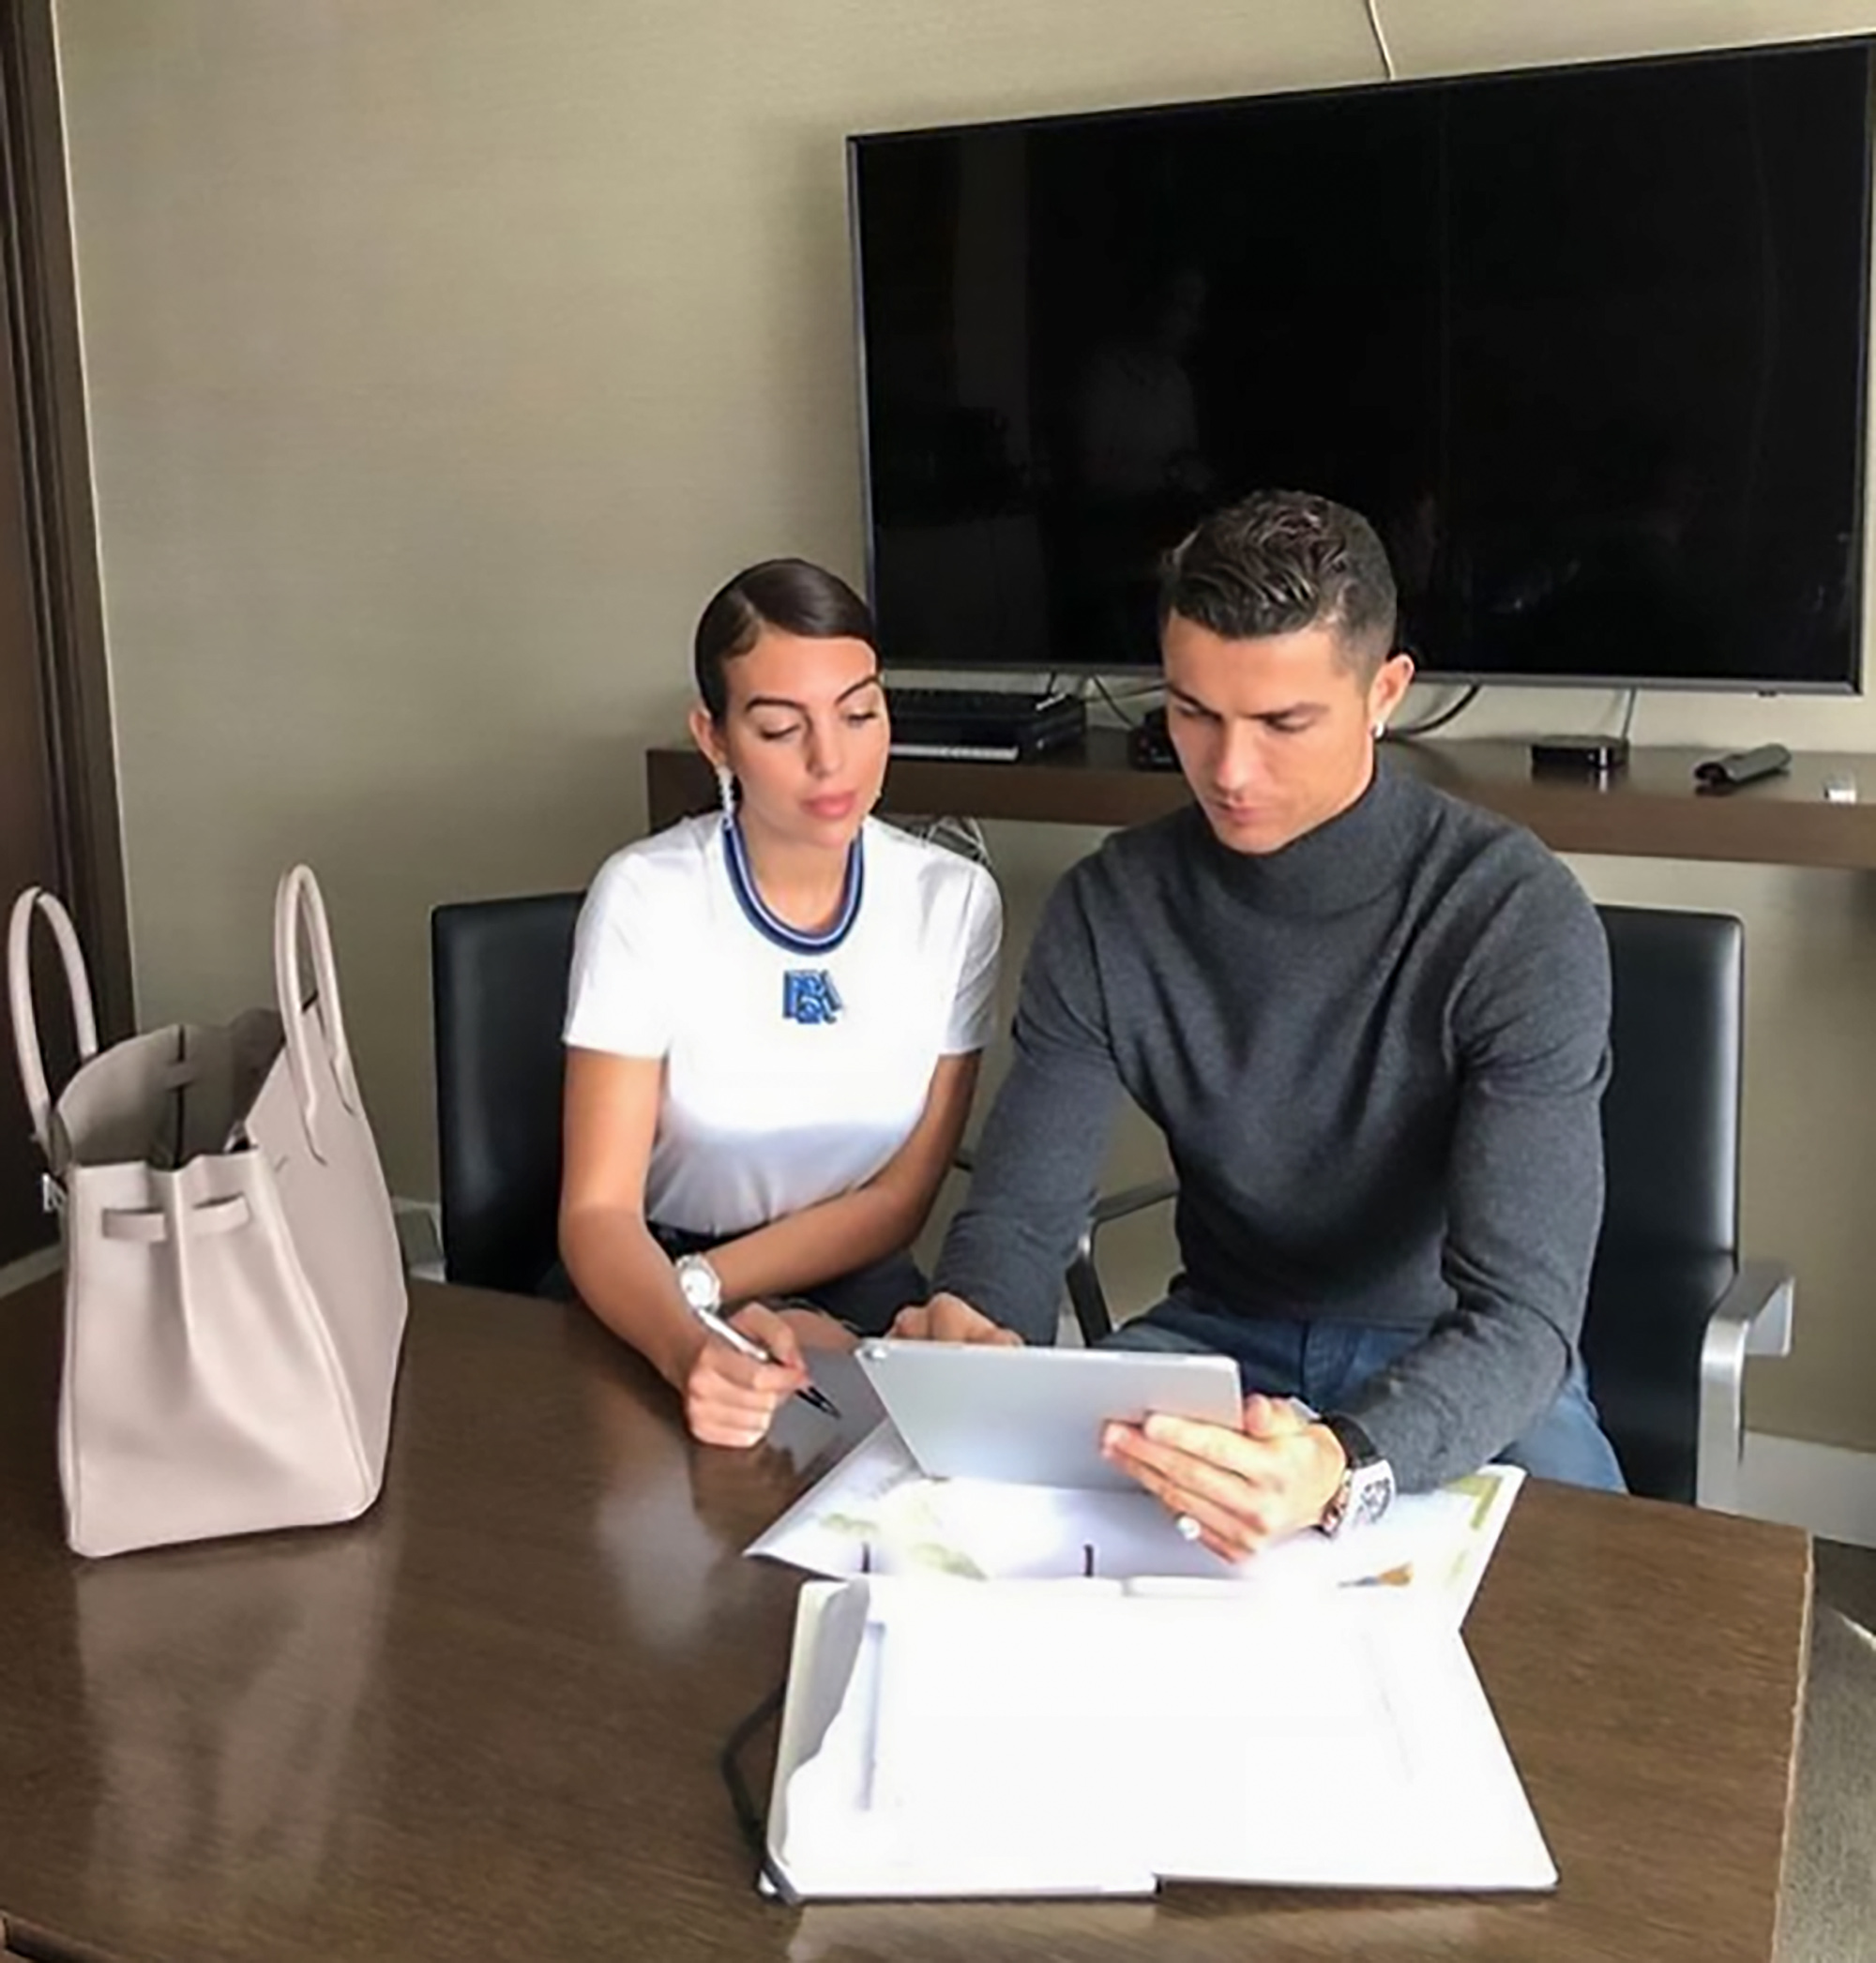 AD The Spanish tax agency is investigating Cristiano Ronaldo's hair transplant clinics for potential unpaid value-added tax. - Newspaper World